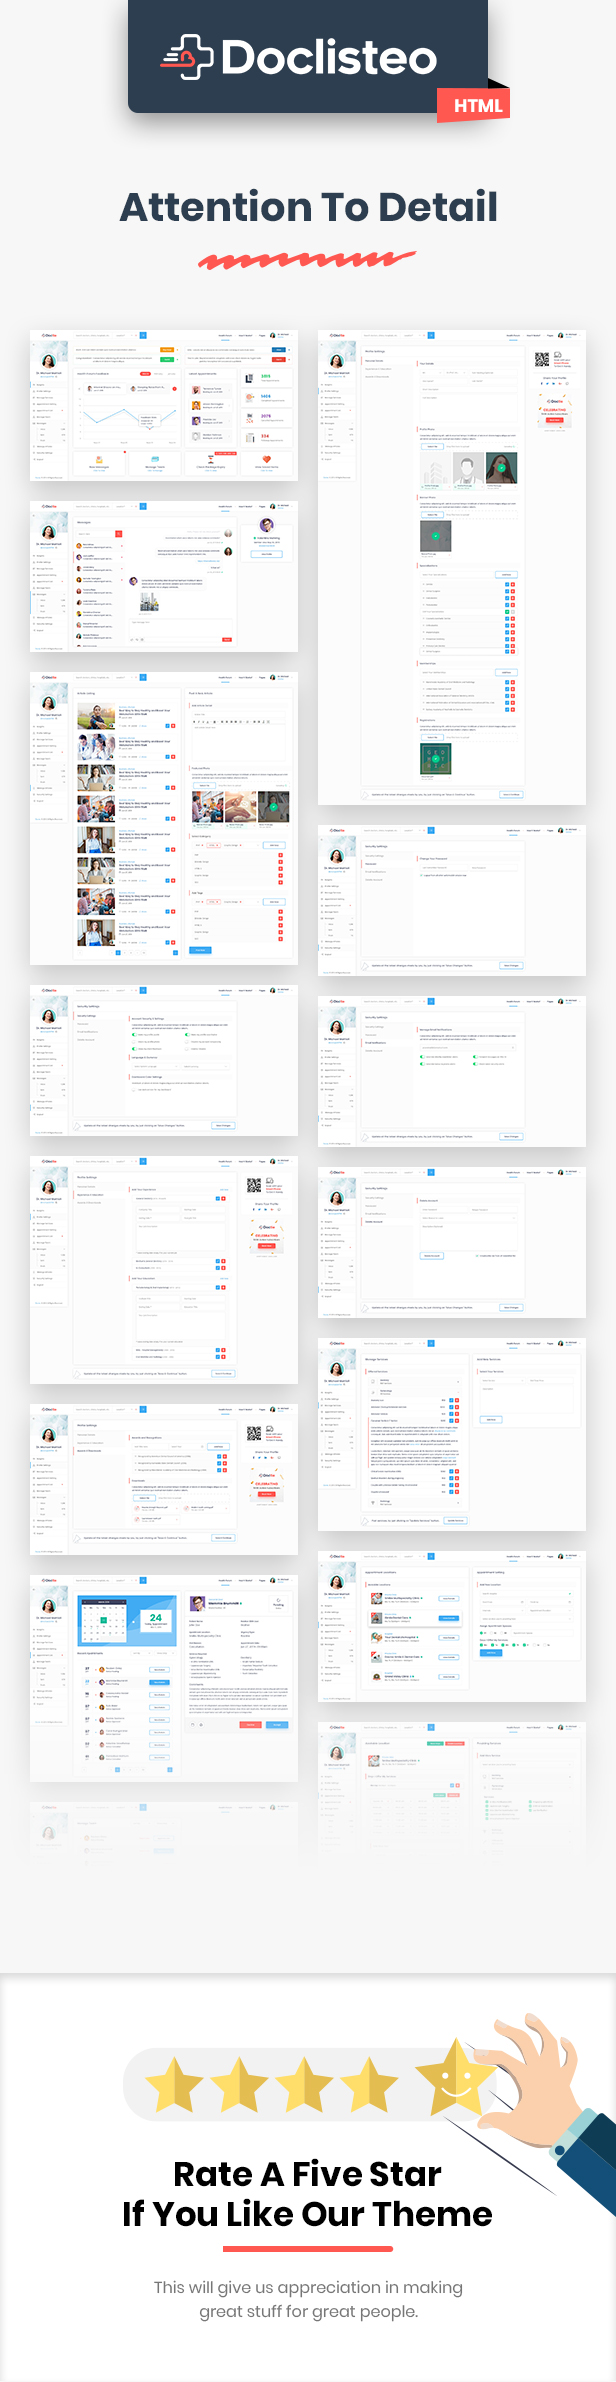 Doclisteo - Responsive Doctors Directory Dashboard Template - 4